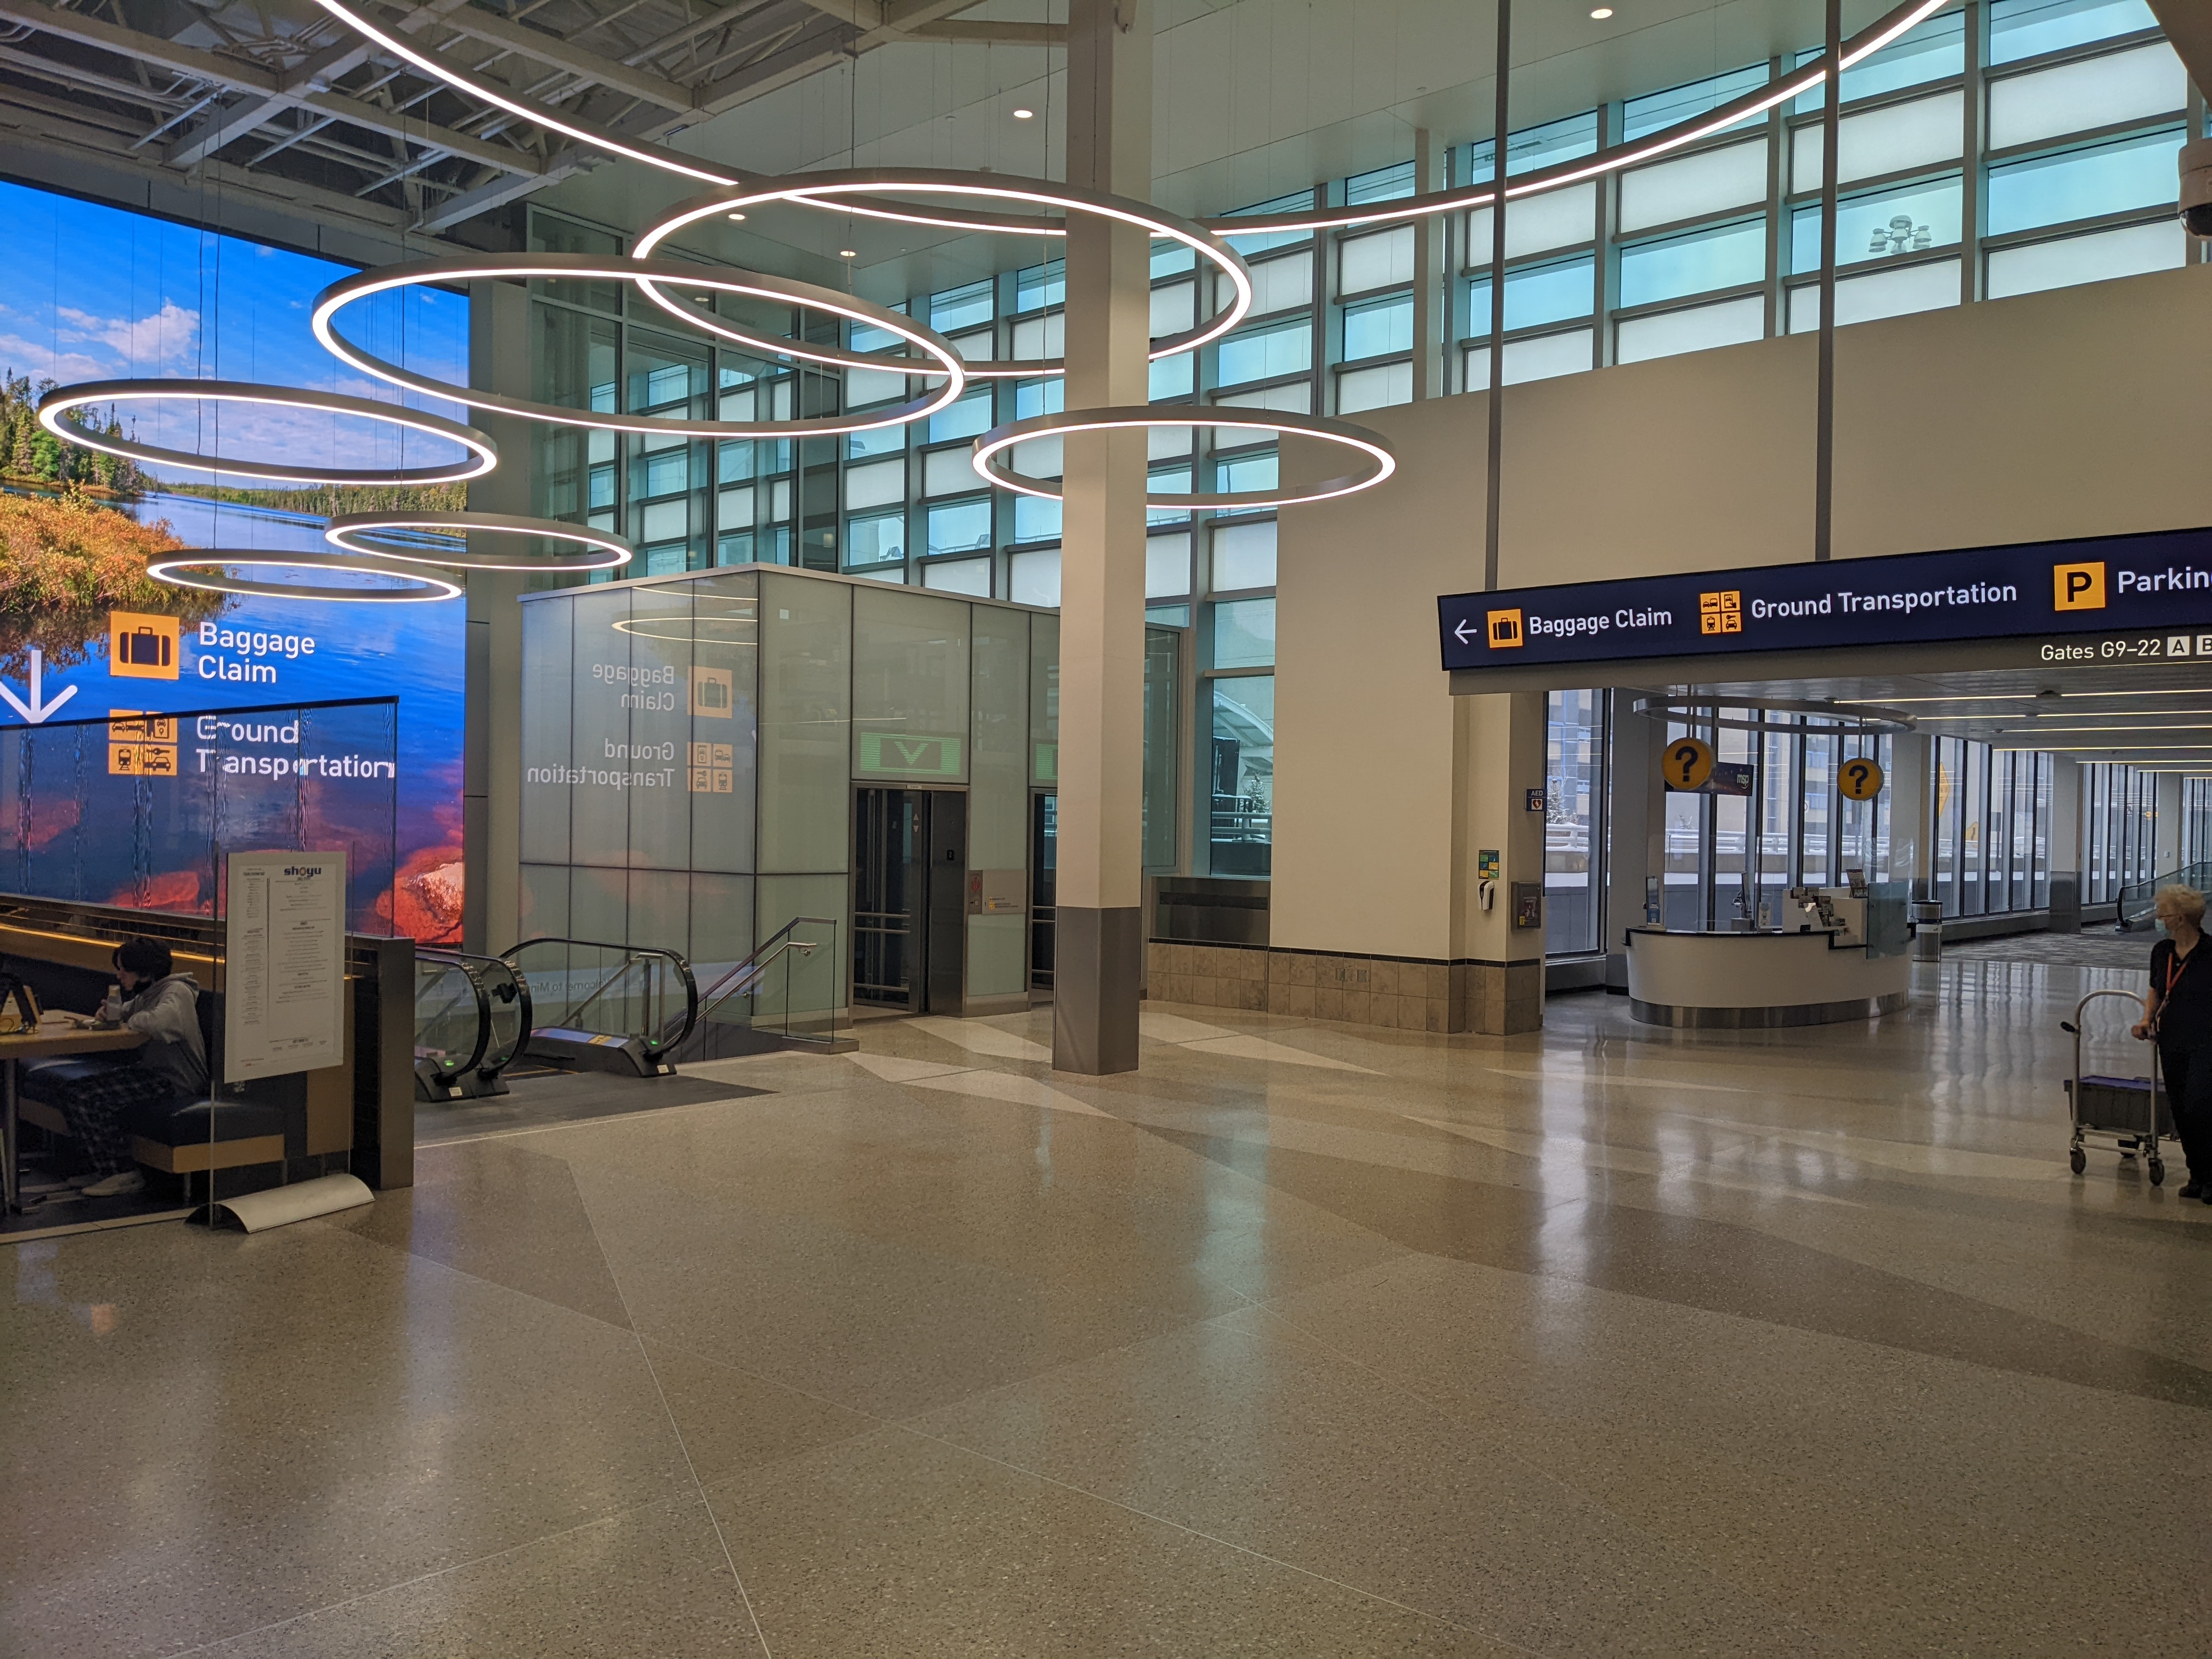 The MSP airport lobby was lit up with LG digital screens.